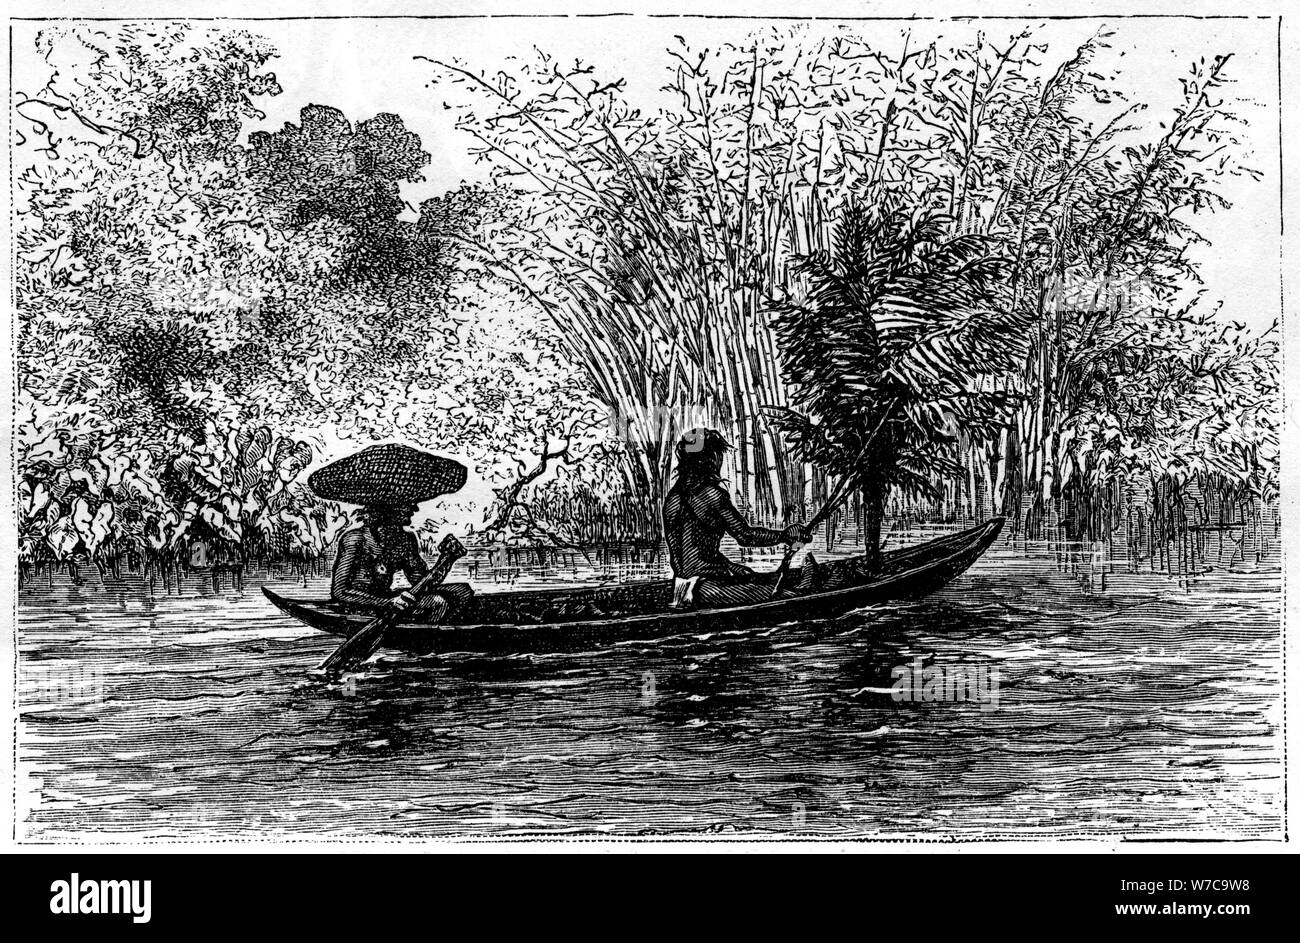 Dugout in the Essequibo River, Guyana, 19th century. Artist: Edouard Riou Stock Photo